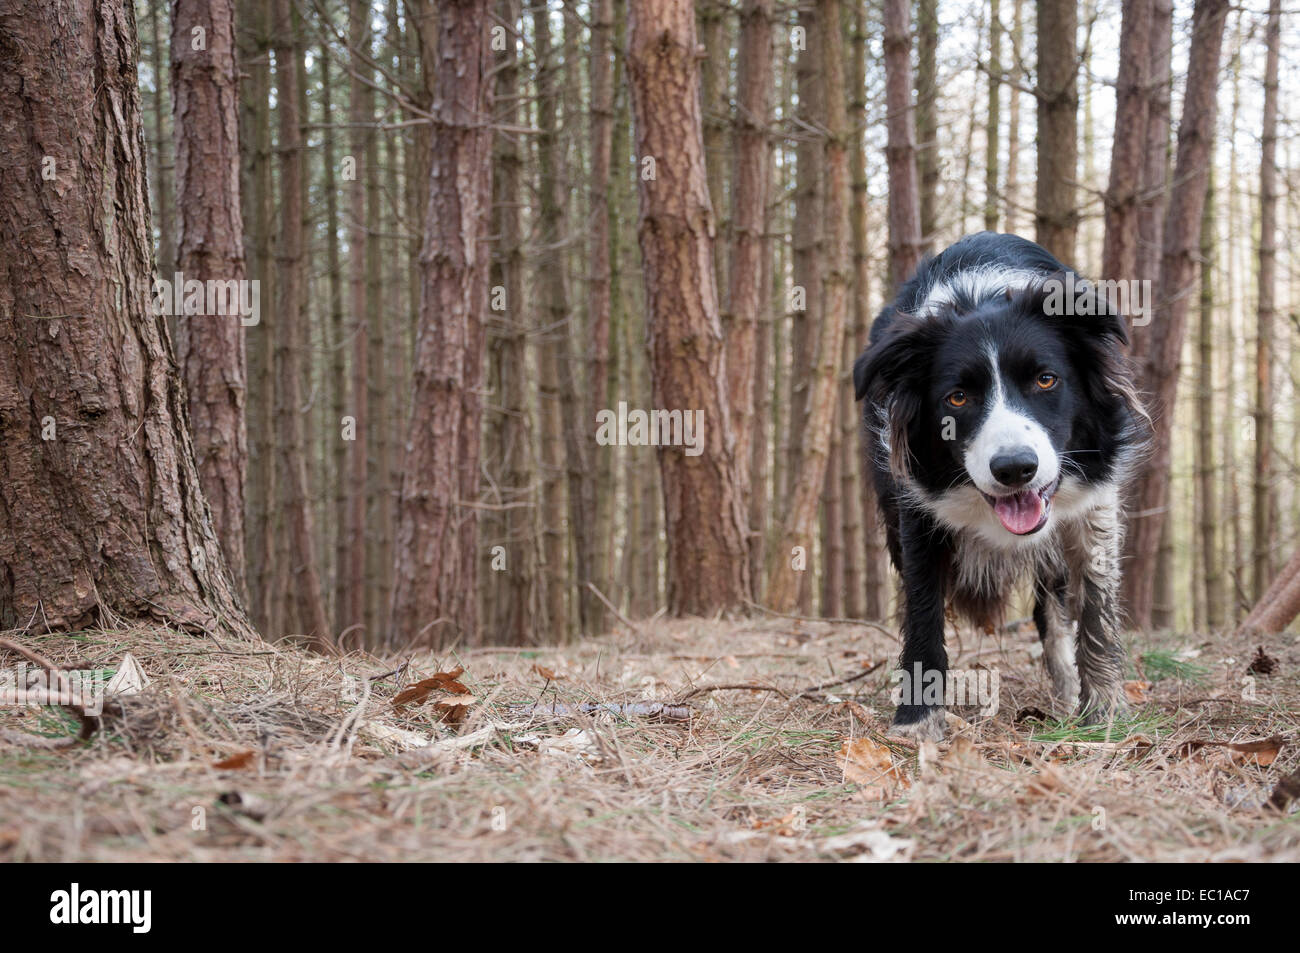 Border Collie dog stood in a forest of Scots Pine trees. Dog facing camera with muddy paws and smiling face. Stock Photo